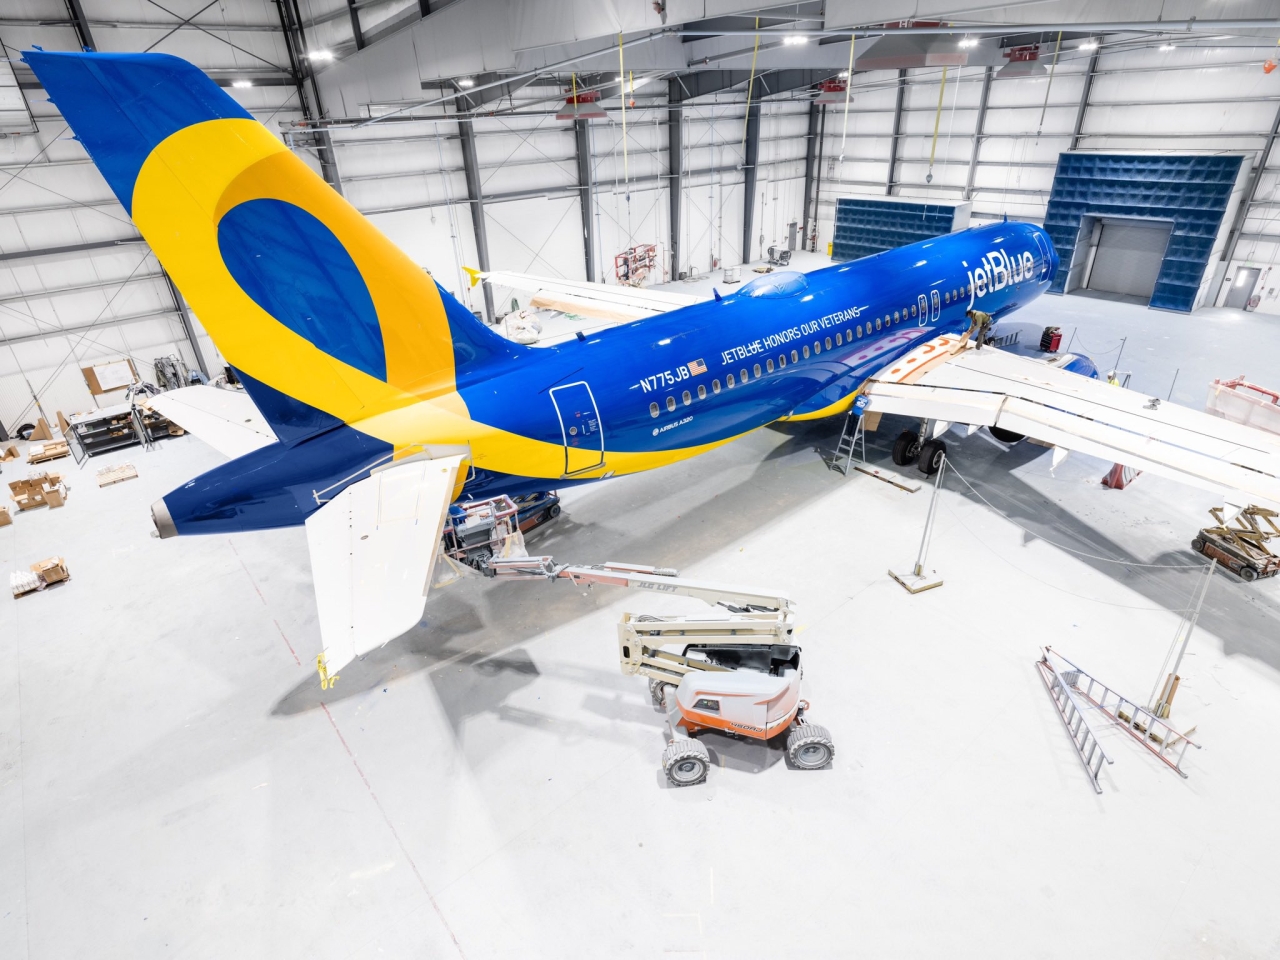 Blue and yellow airplane in hangar